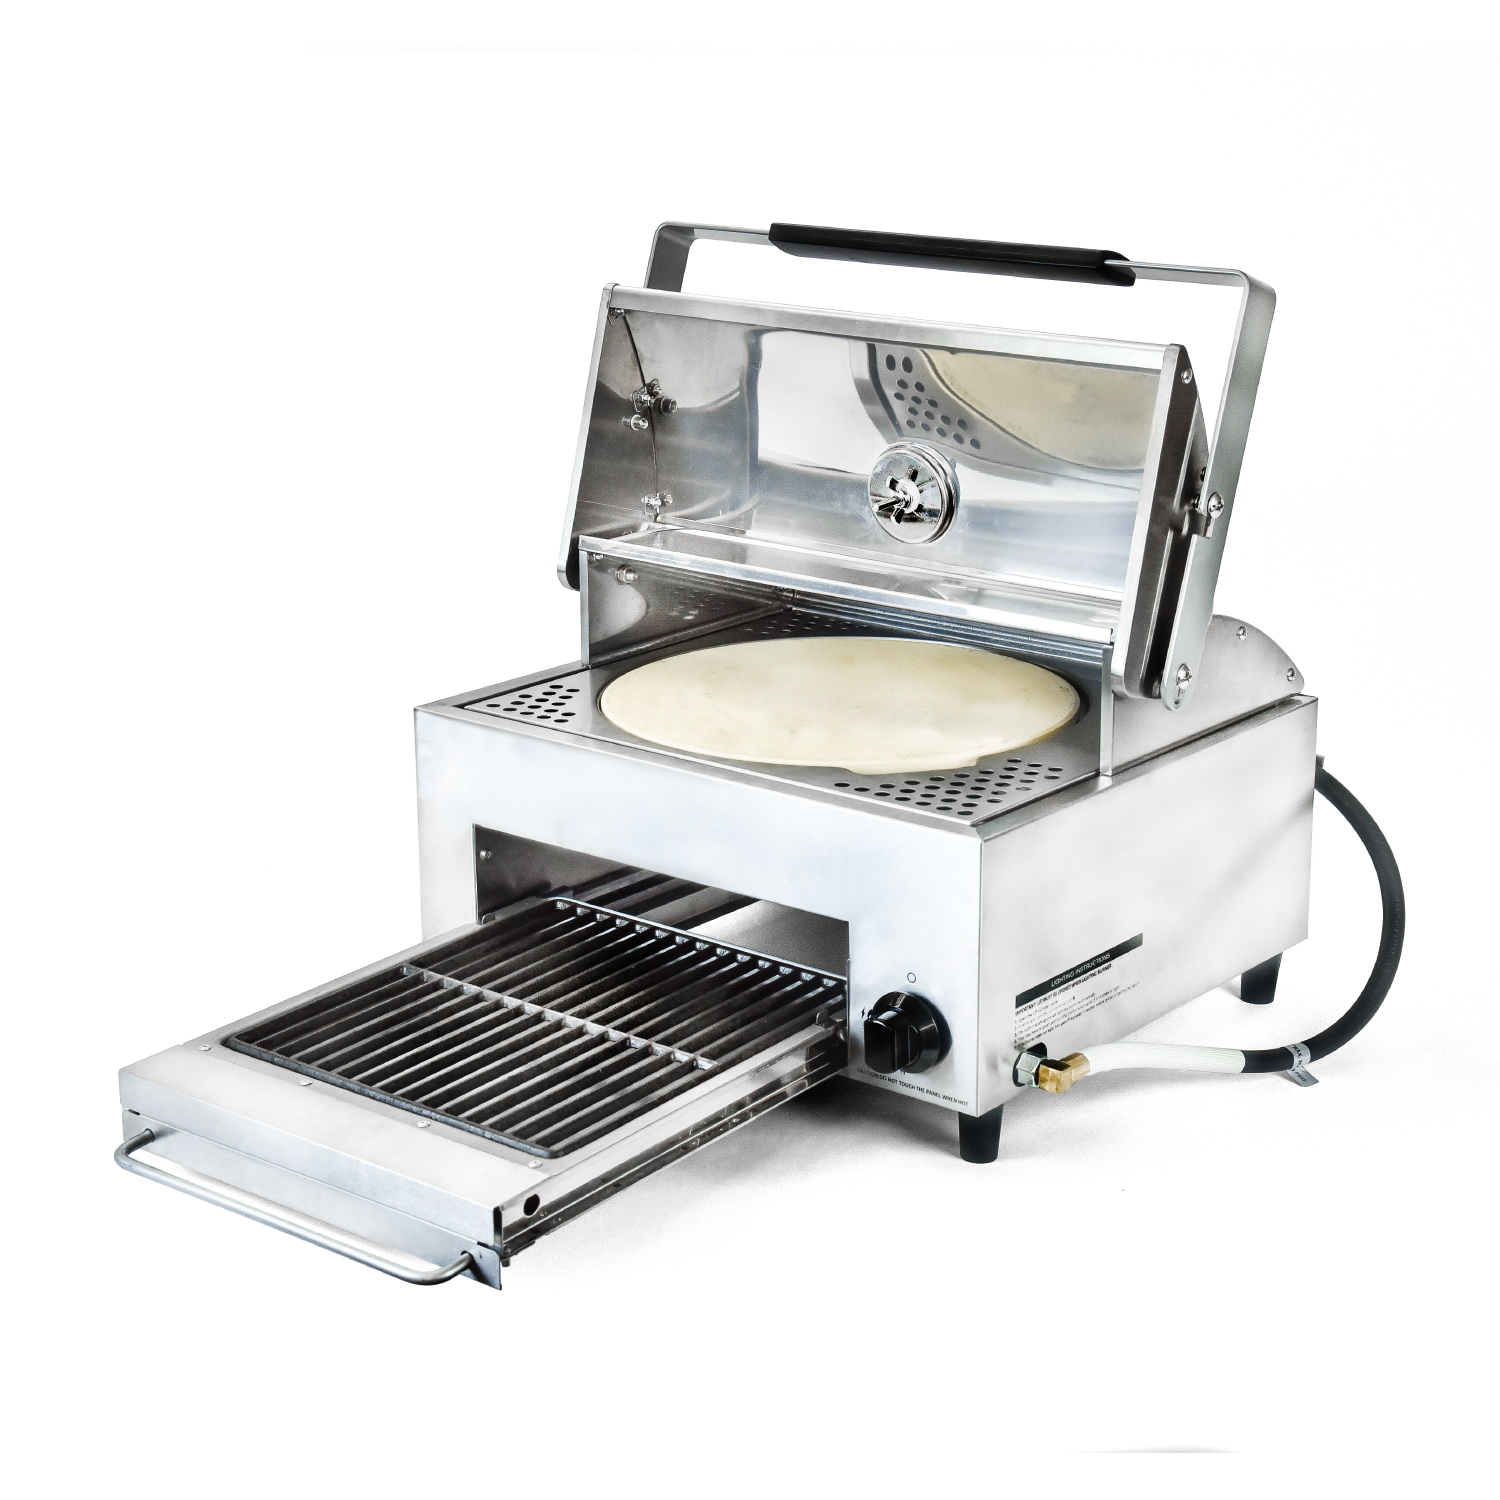 OvenPlus Double Deck Outdoor Pizza Oven